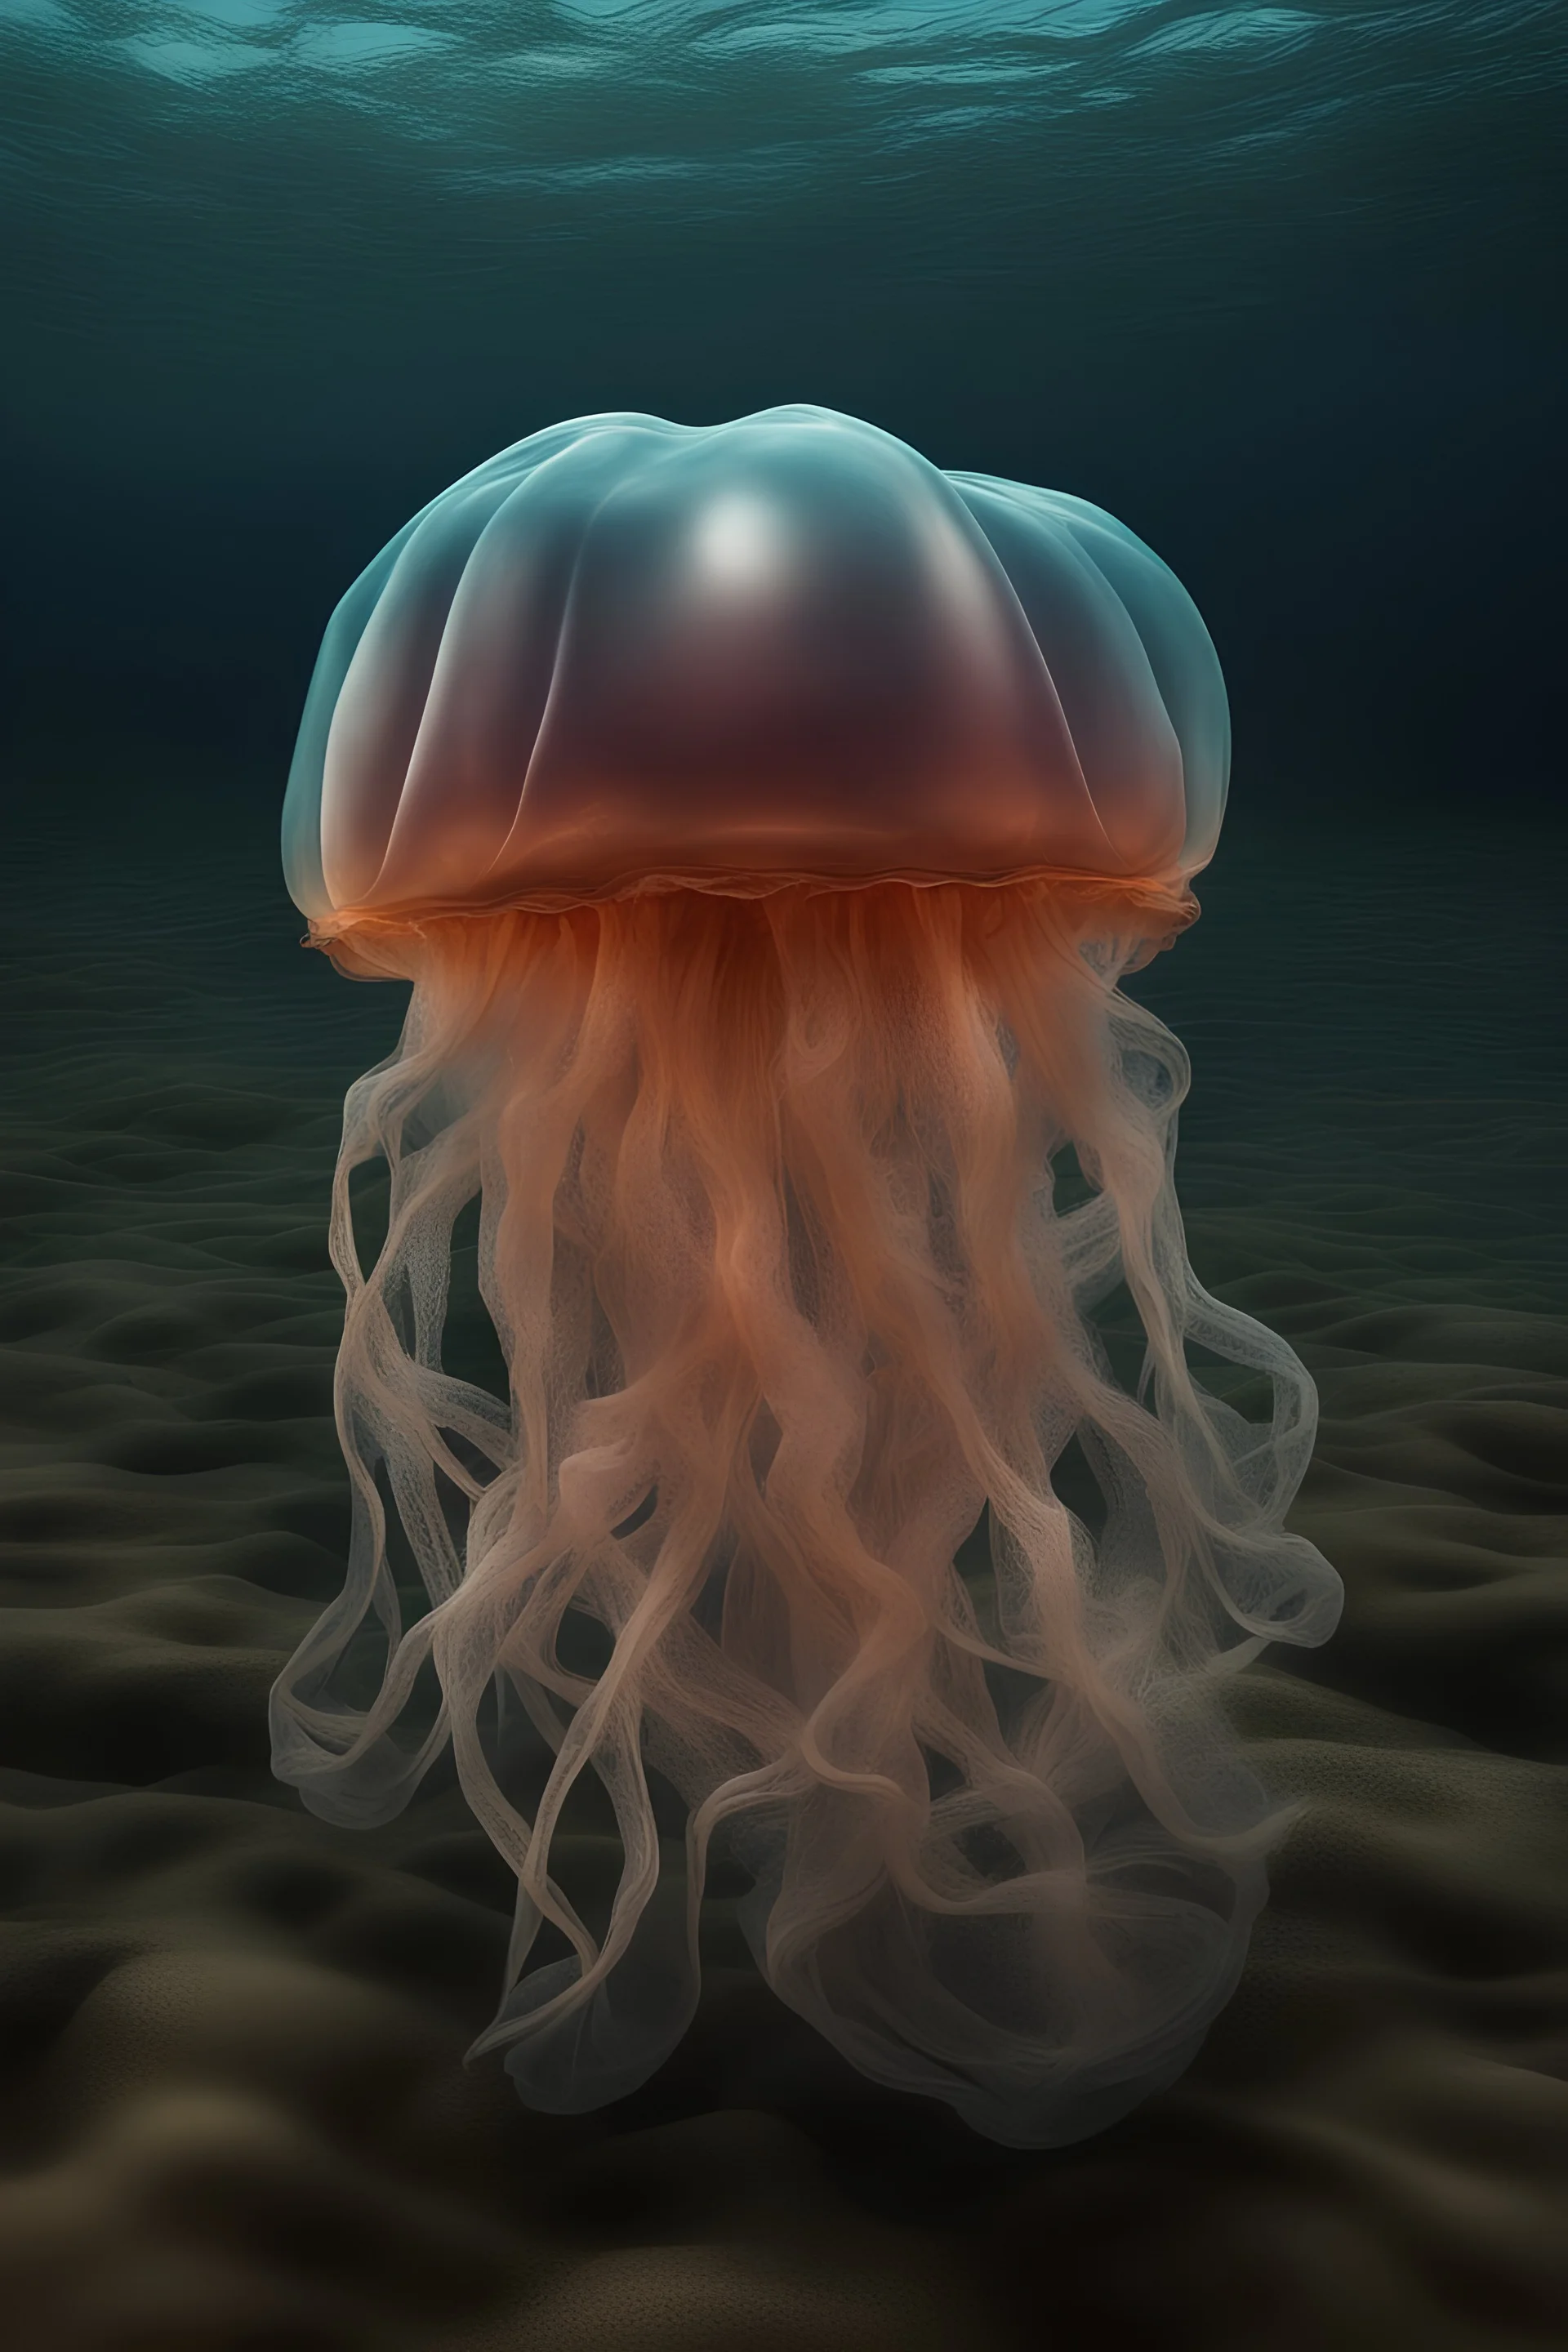 A nylon bag in the ocean looking exactly like jelly fish. Hyper realistic photo.